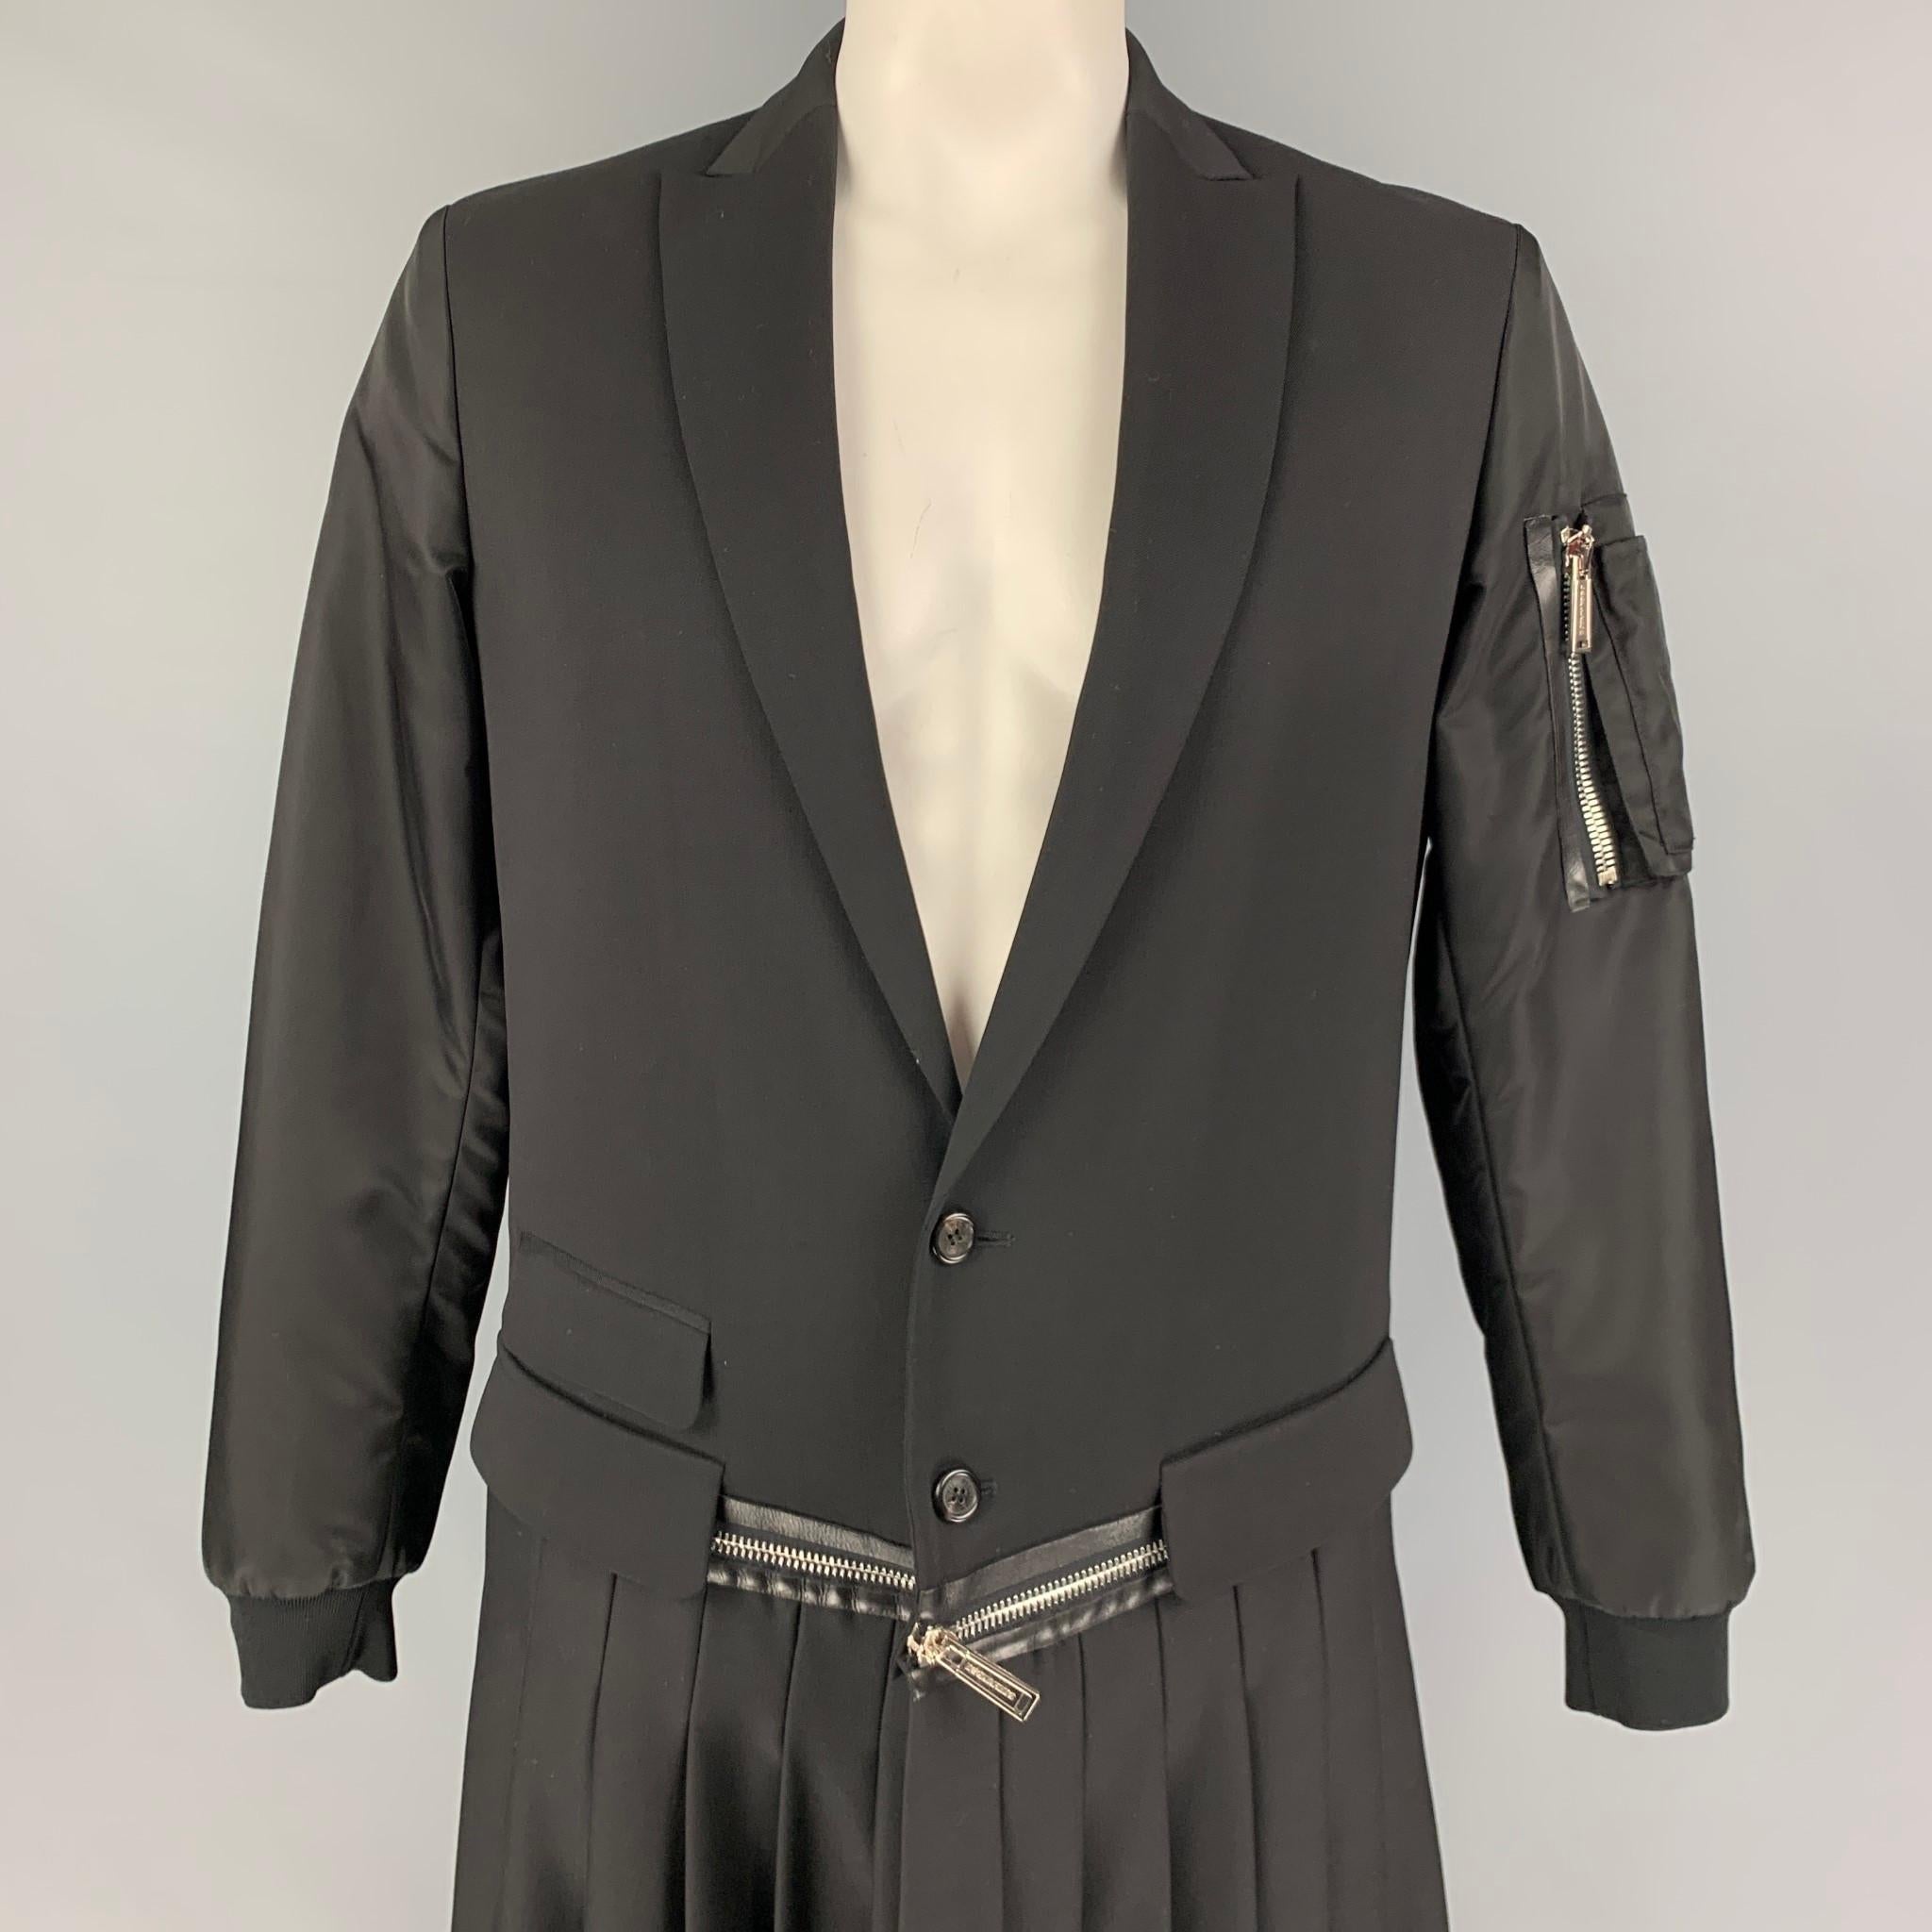 DSQUARED2 Fall-Winter 2016 coat comes in a black mixed fabrics featuring a peak lapel, bomber sleeves, detachable pleated skirt design, and a double button closure. Made in Italy. 

Excellent Pre-Owned Condition.
Marked: 48

Measurements:

Shoulder: